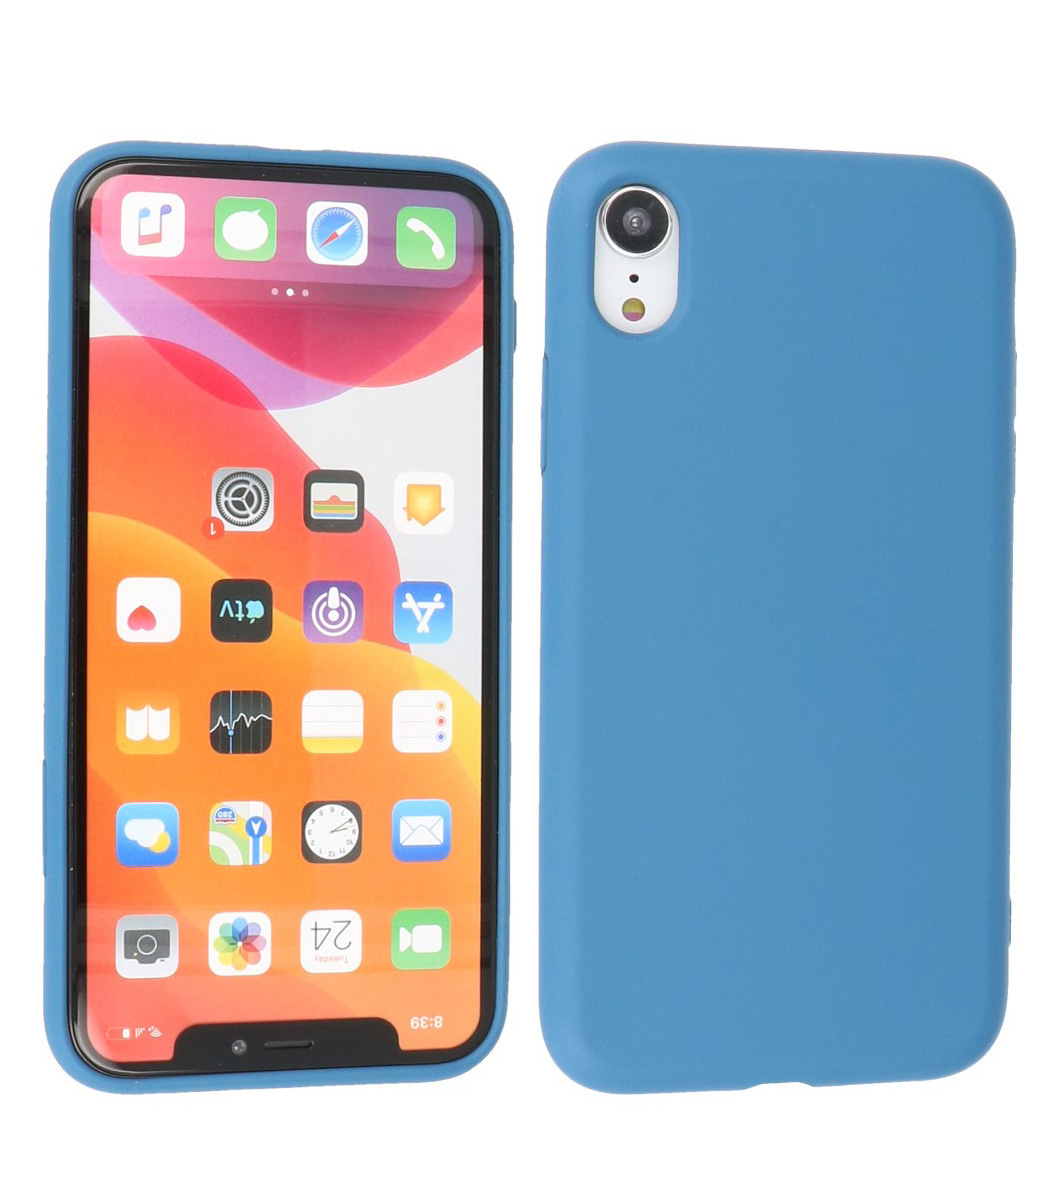 2.0mm Fashion Color TPU Hoesje voor iPhone XR Navy